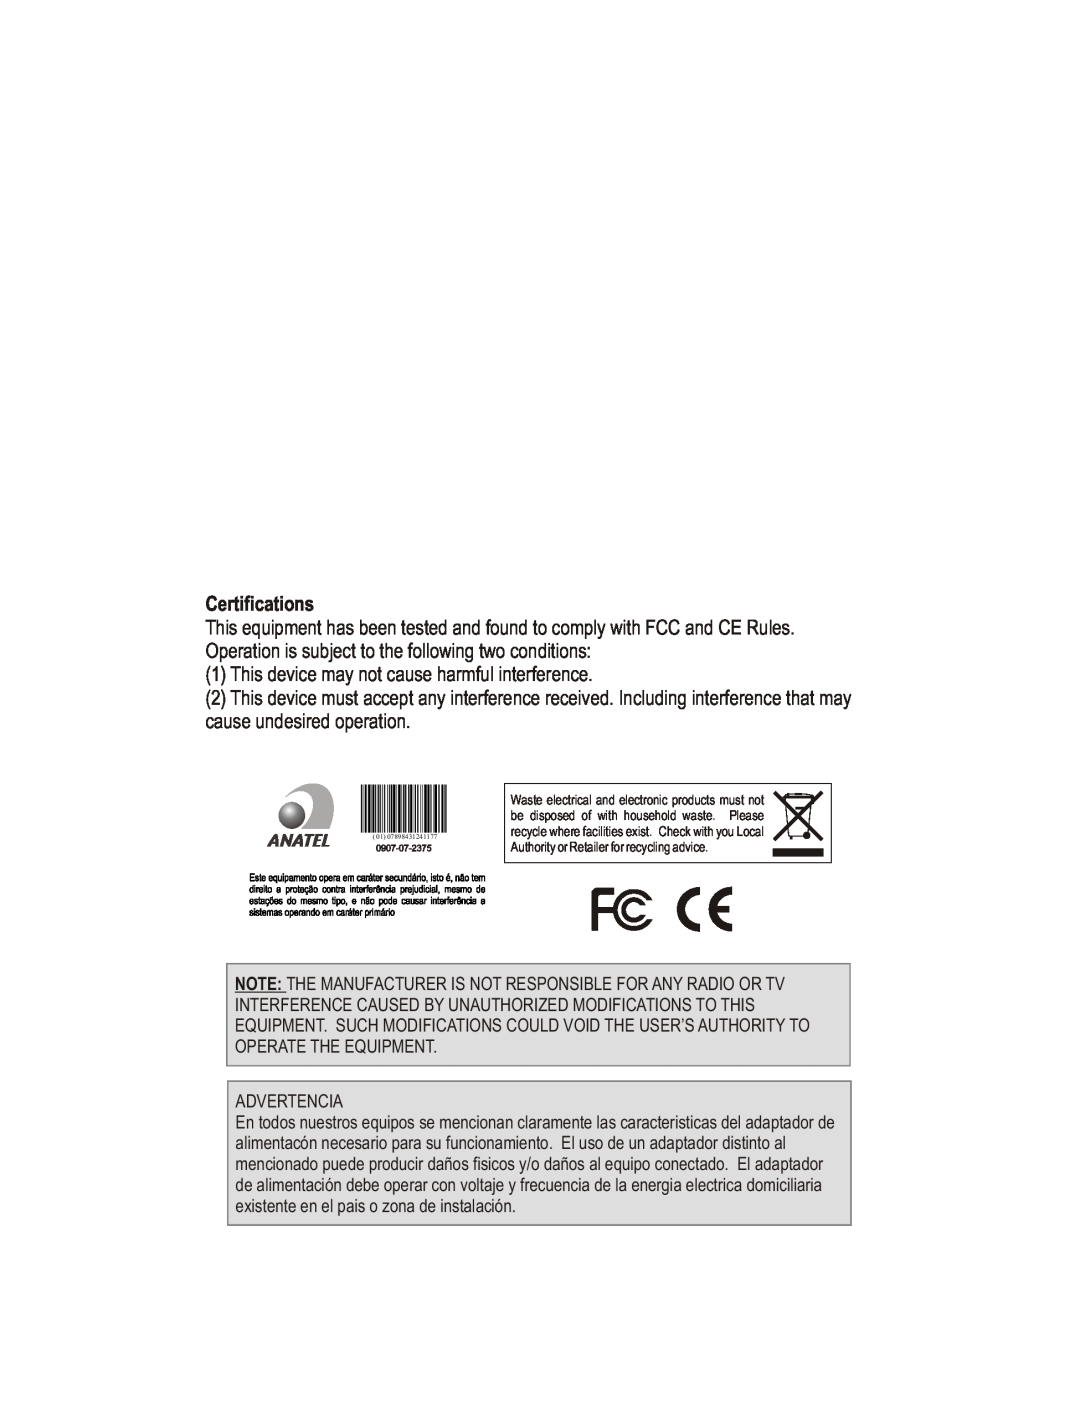 TRENDnet TW100-BRV304 manual Certifications, This device may not cause harmful interference 